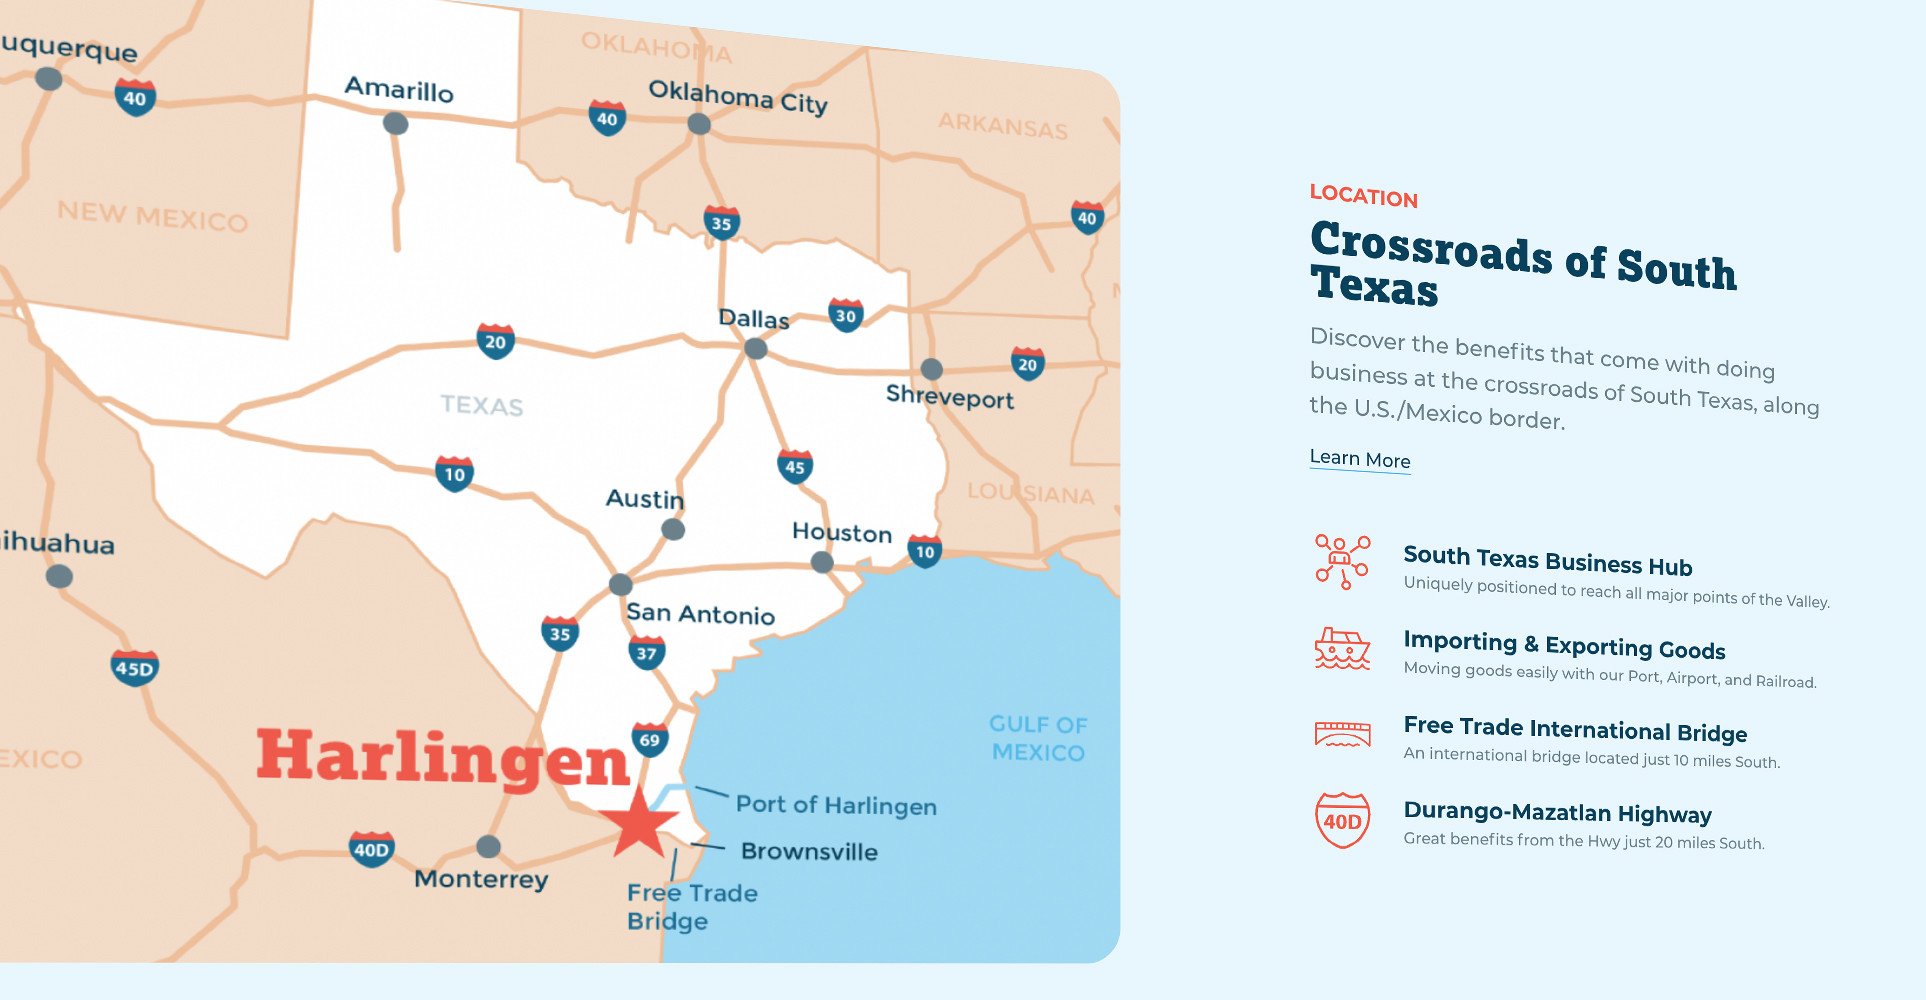 Harlingen's map surrounded by Texas and Mexico